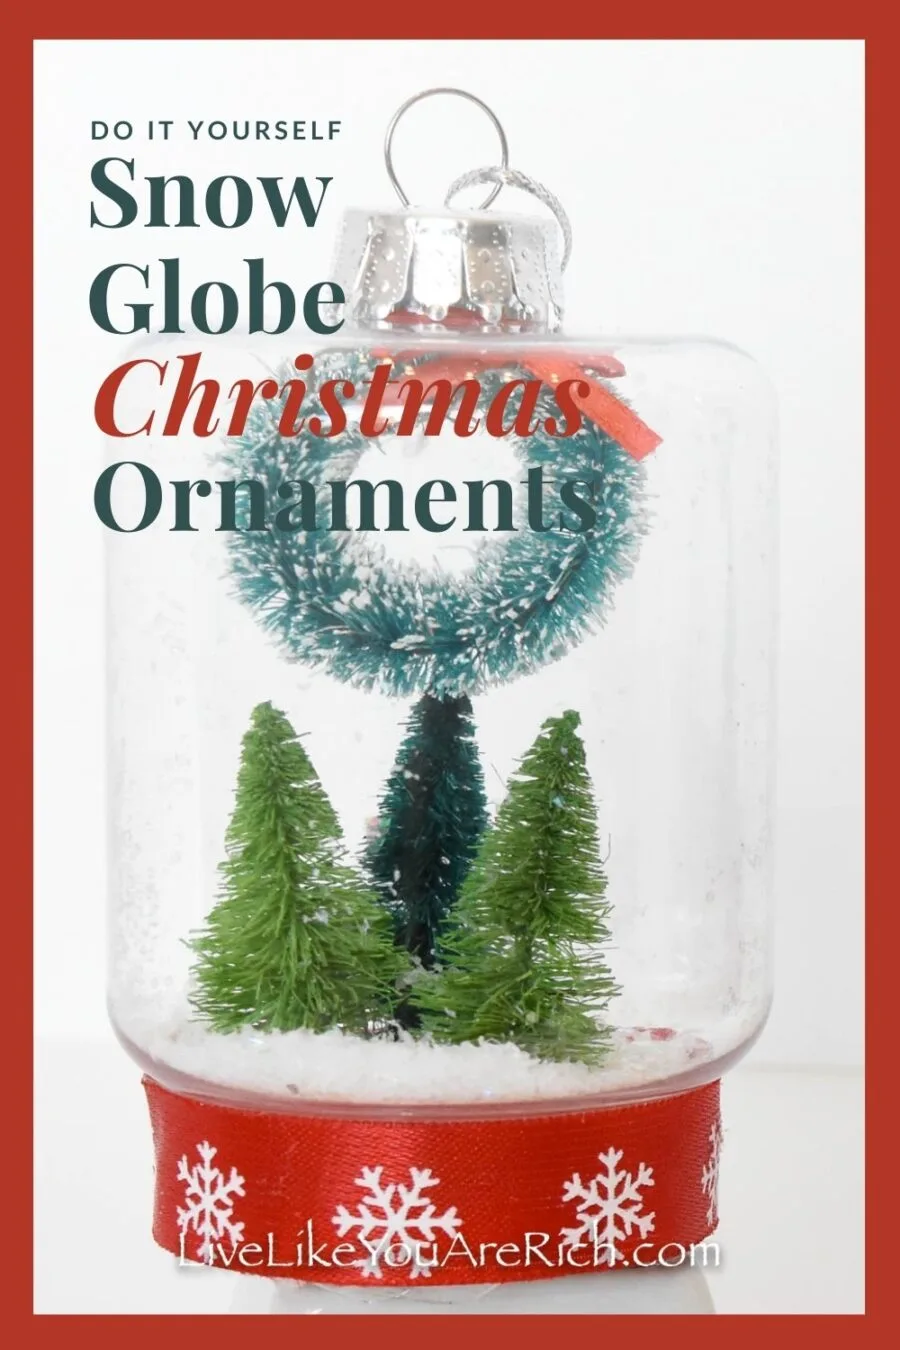 These DIY Snow Globe Christmas Ornaments were only about $3.00 each to make. They were super fun to put together and only took a few minutes each. I love snow globes. They are so whimsical and nostalgic. These are a bit of a twist on the standard snow globe, they are not filled with water and they are also Christmas tree ornaments.  